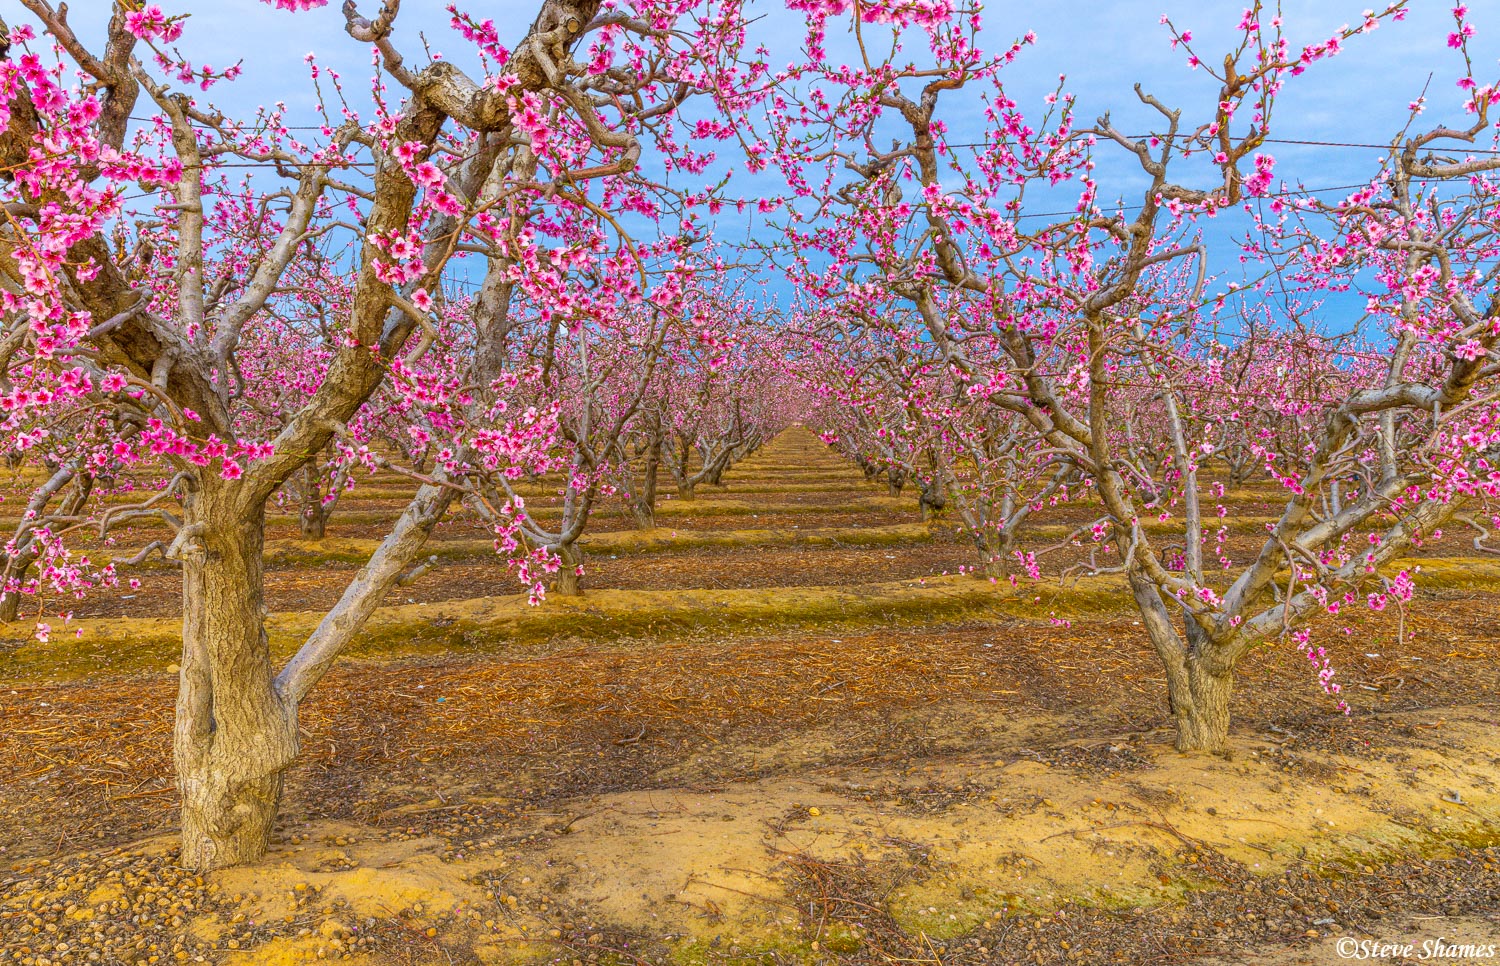 Fresno County orchard in the spring blossom!